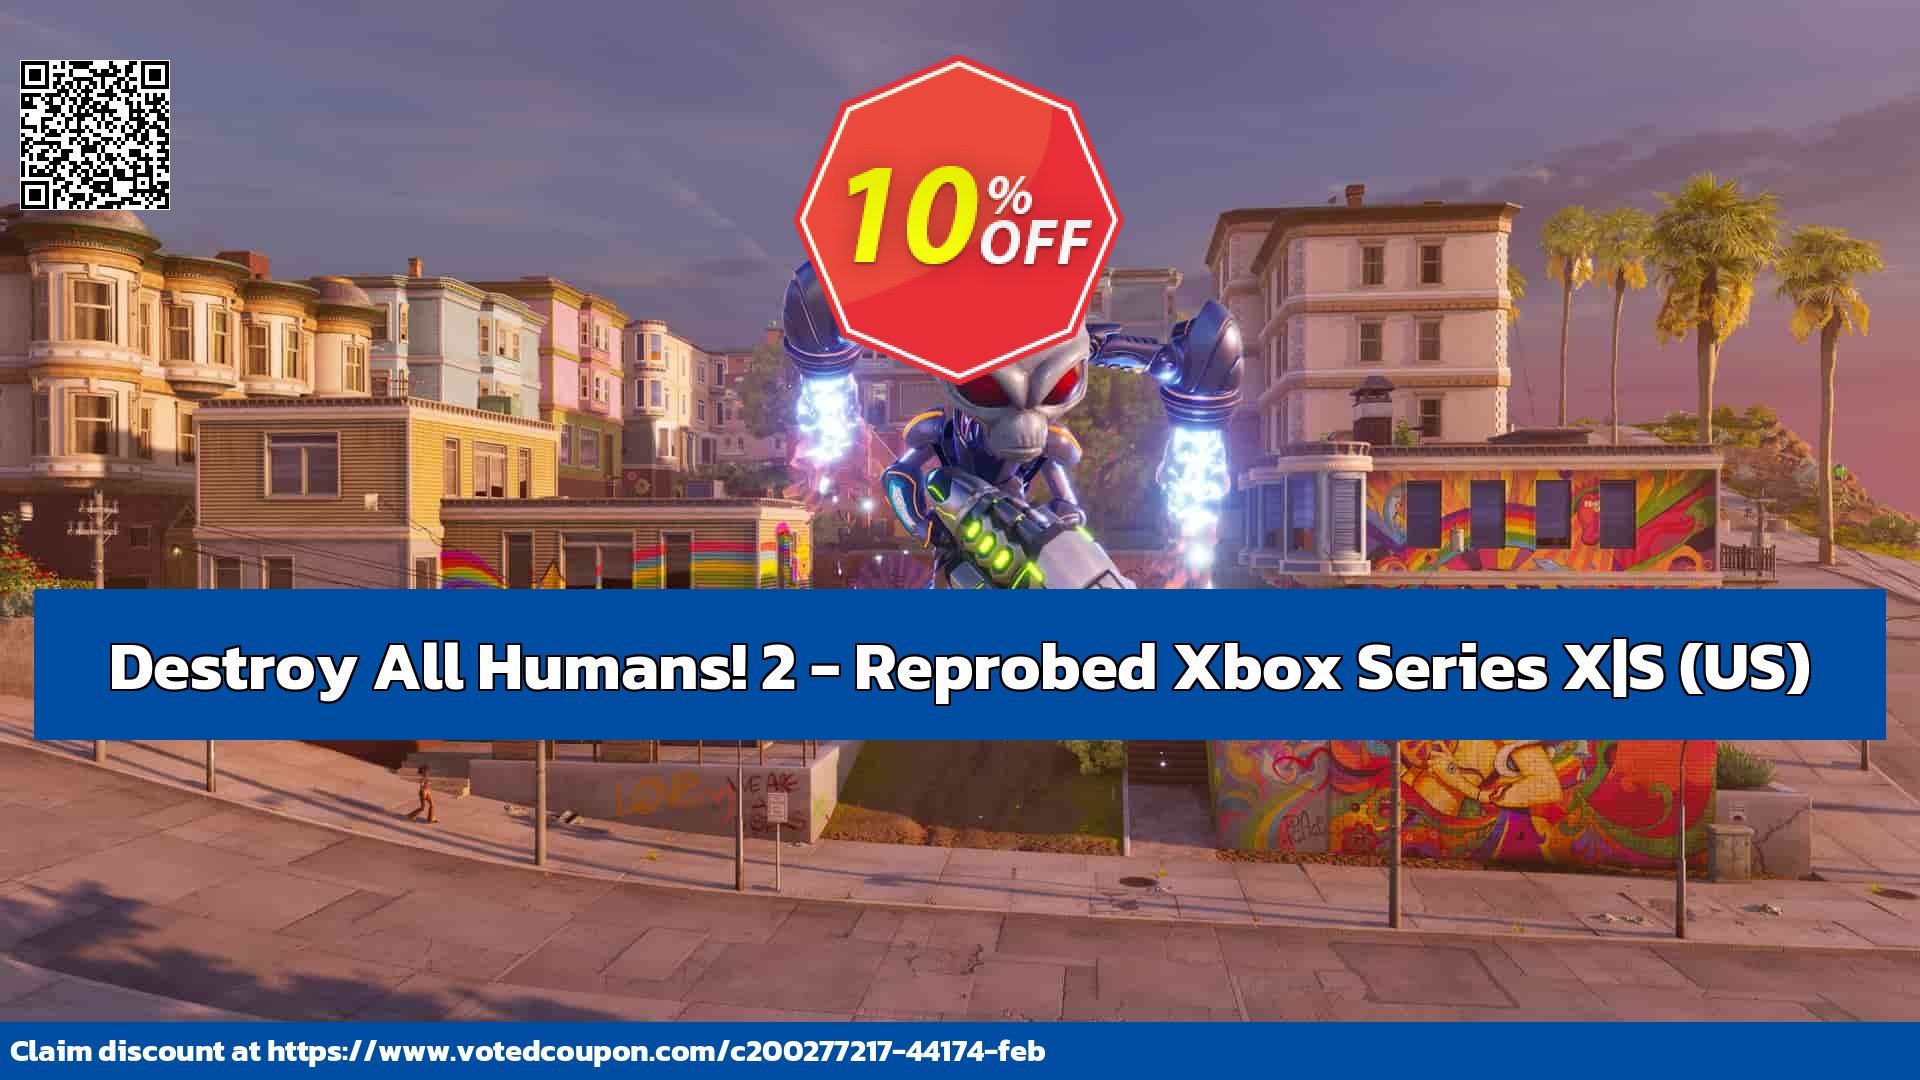 Destroy All Humans! 2 - Reprobed Xbox Series X|S, US  voted-on promotion codes